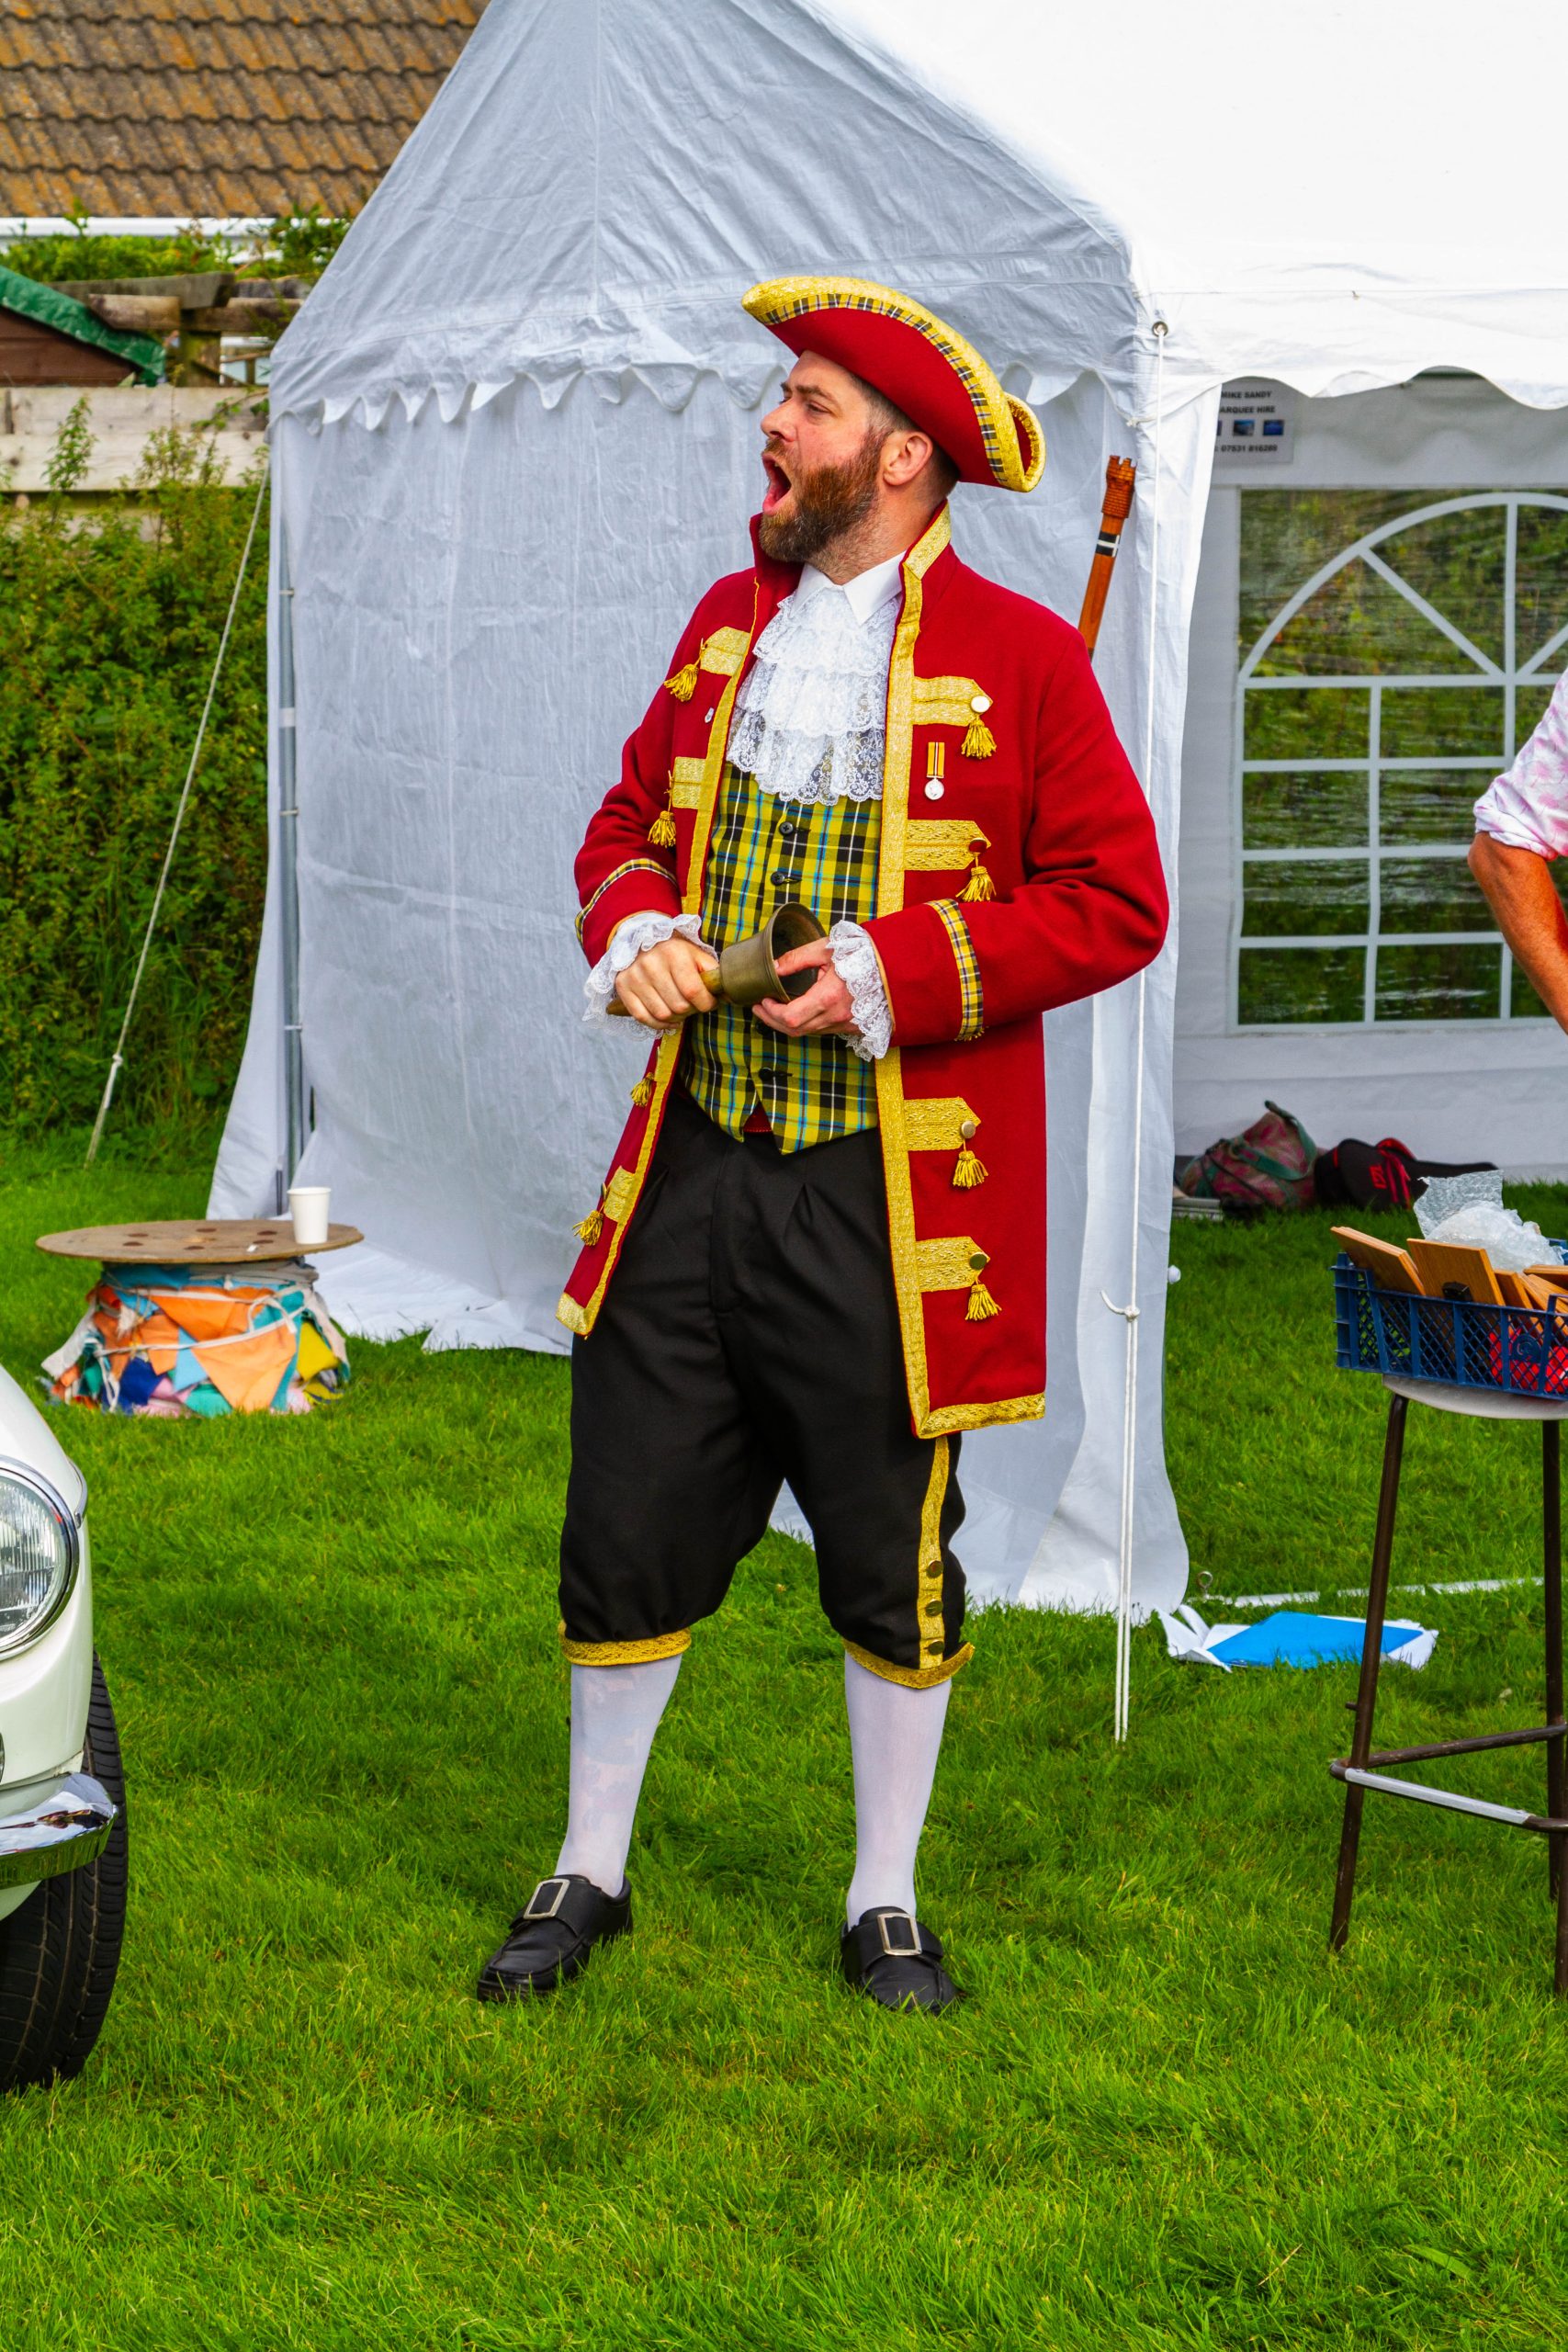 Our Town Cryer Alan